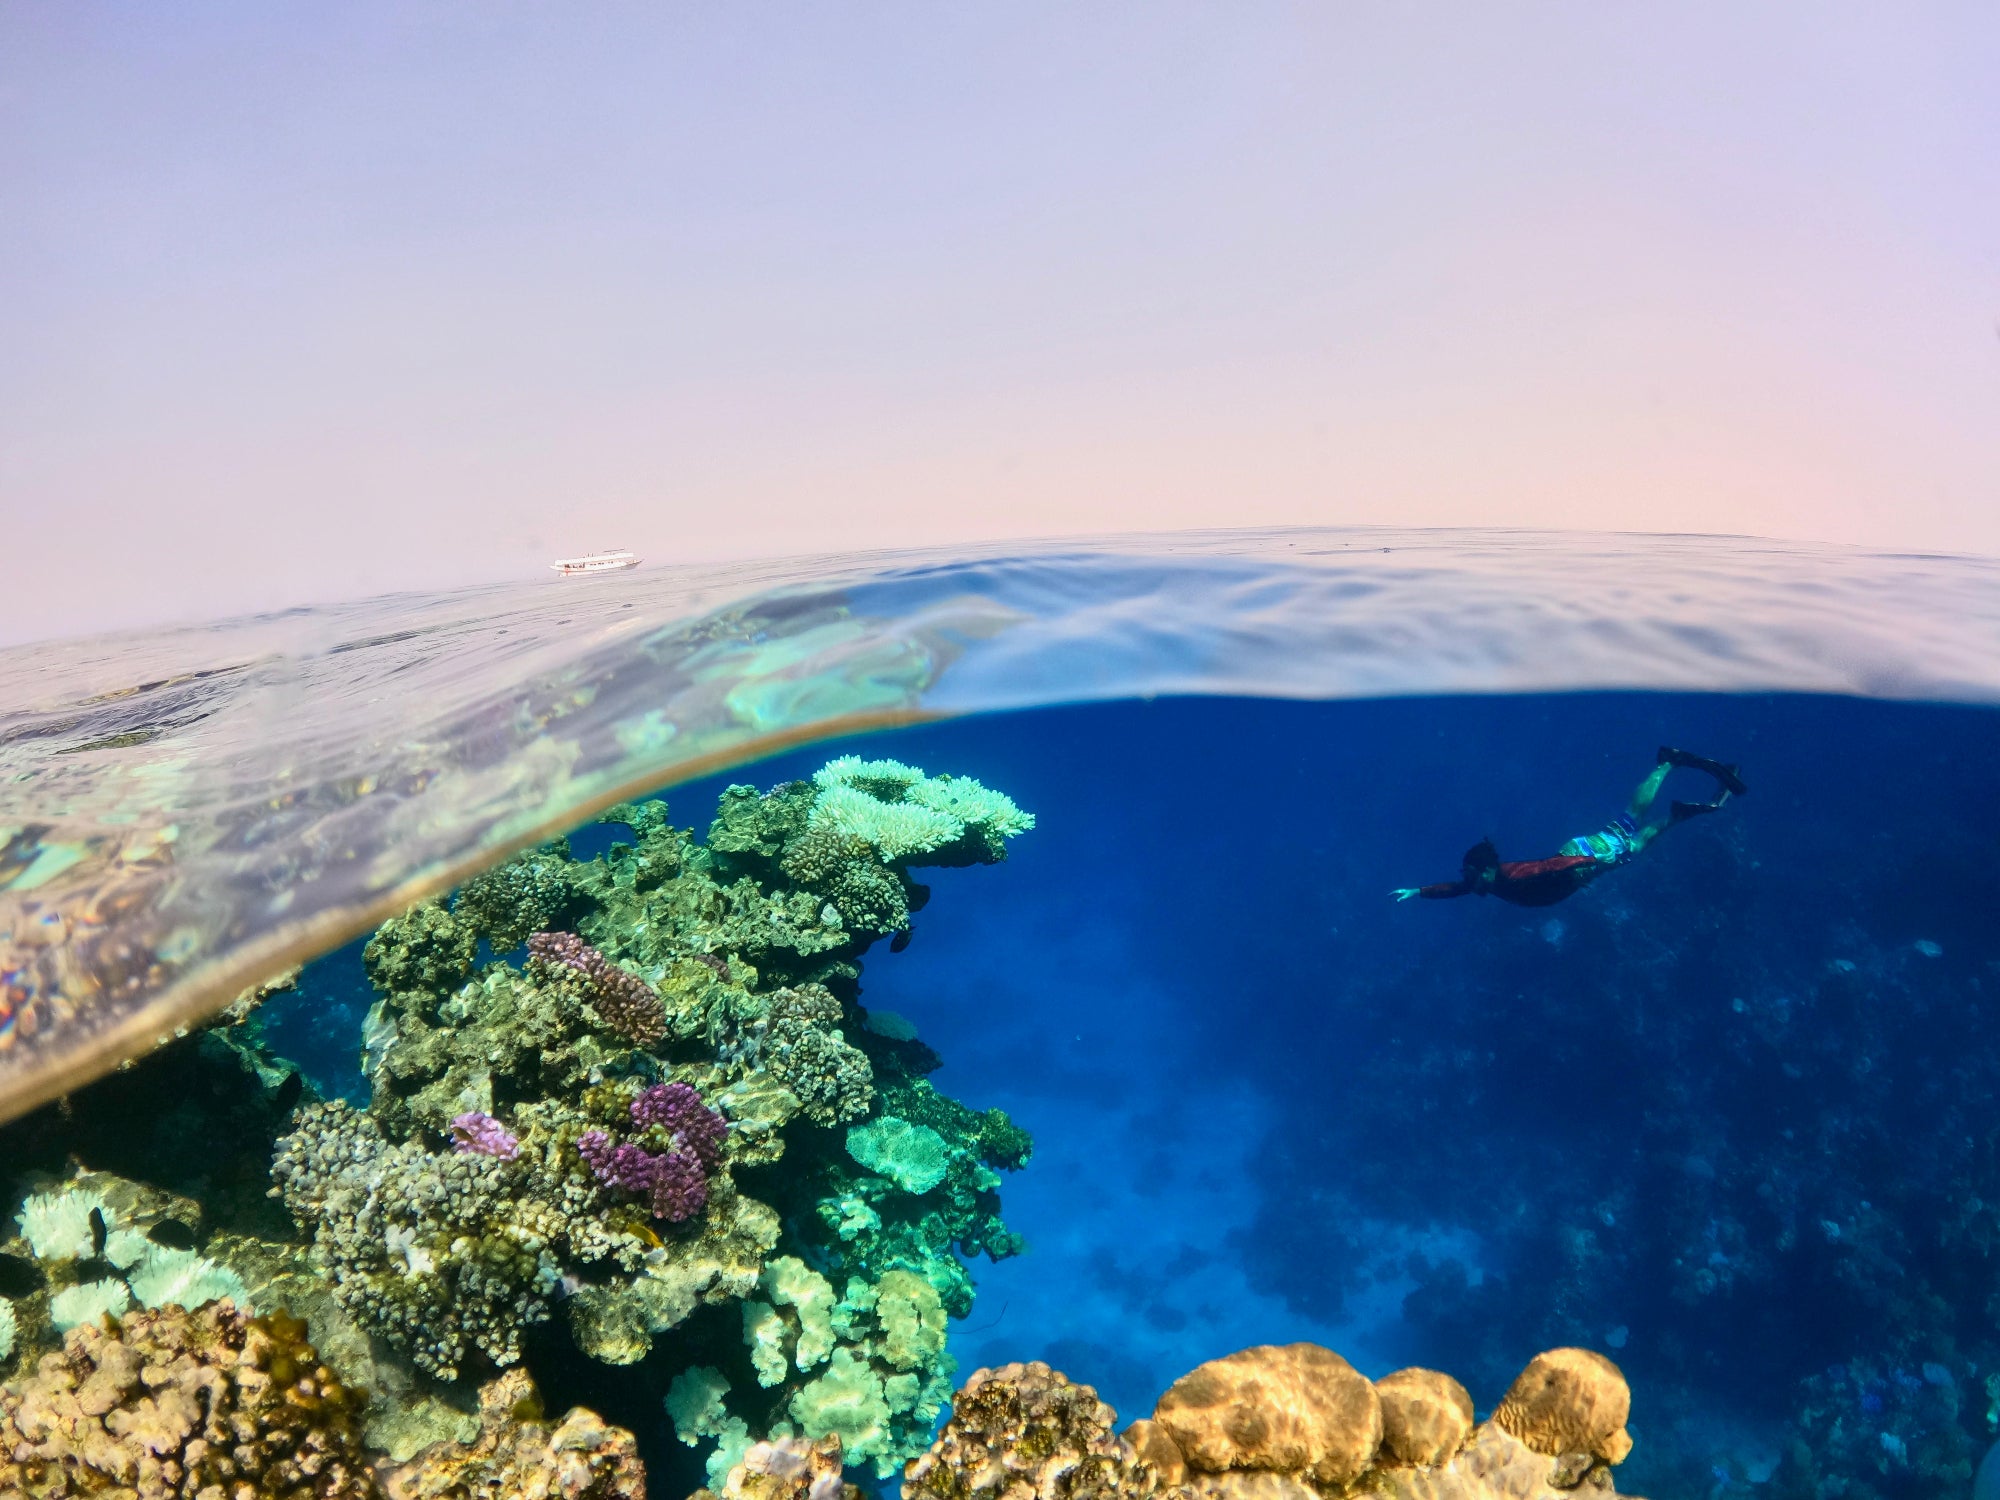 Researchers exploring the Red Sea